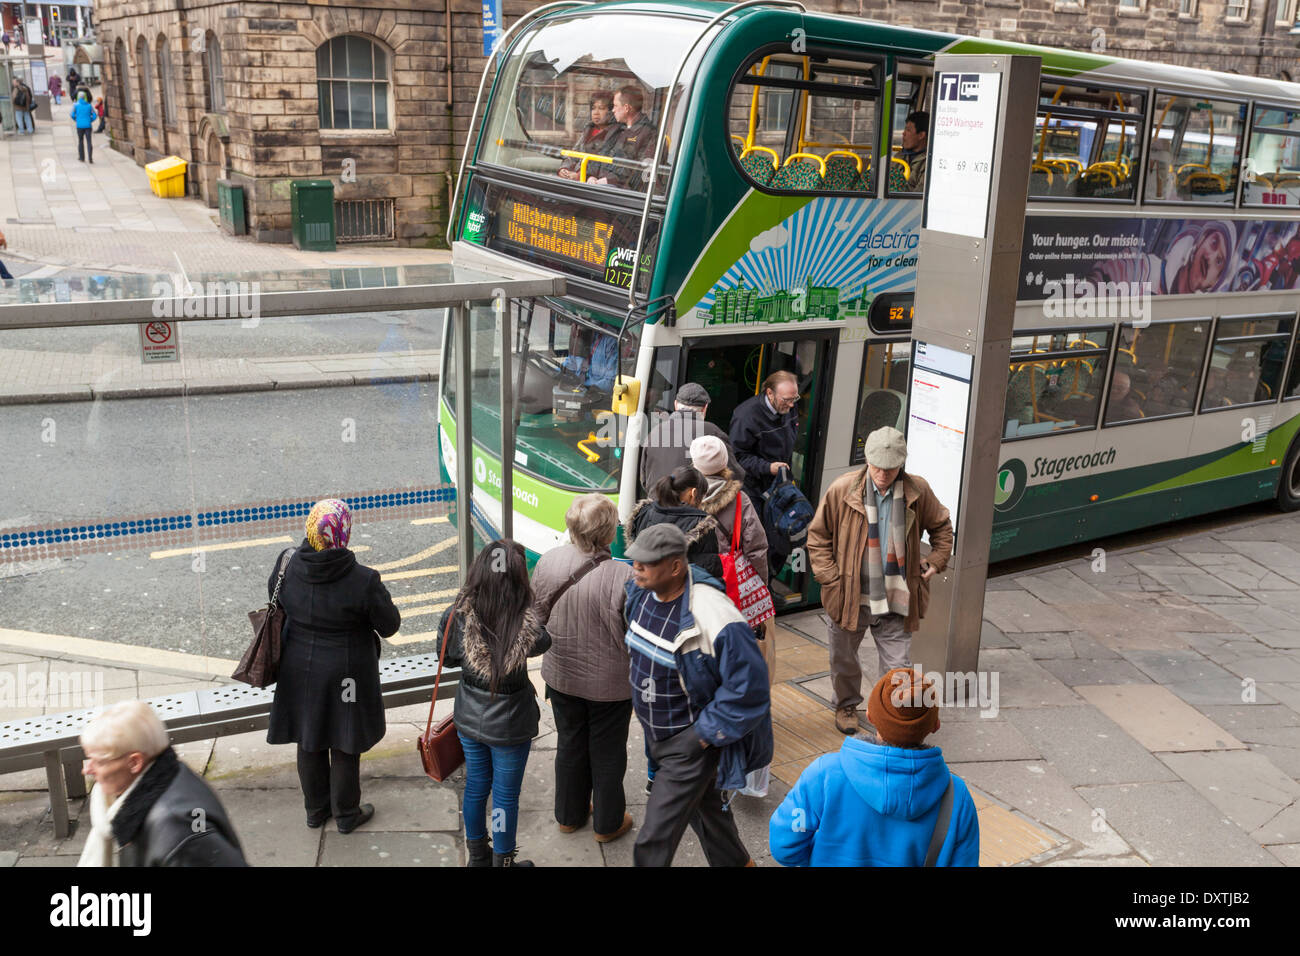 Public transport. People waiting at a bus stop while passengers are getting off a bus, Sheffield city centre, Yorkshire, England, UK Stock Photo